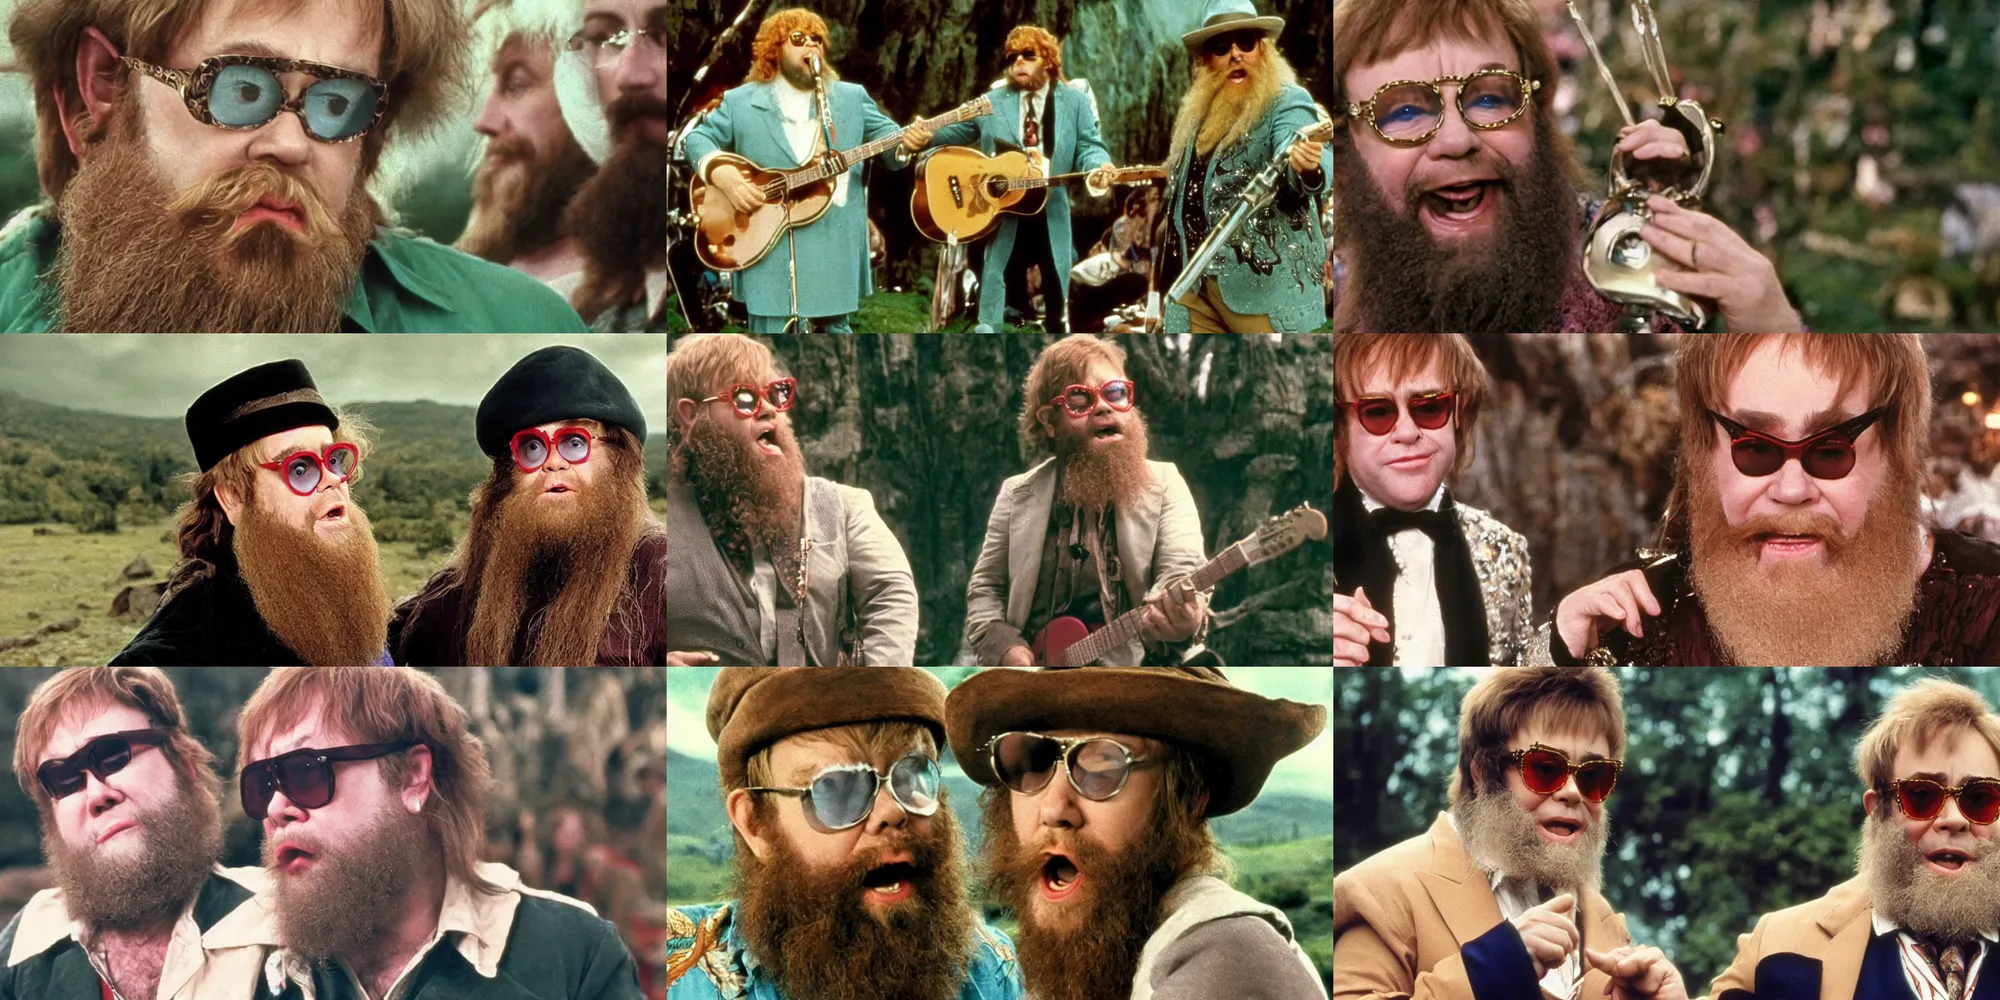 Prompt: A full color still of Elton John playing a big burly Tom Bombadil with a fake beard in Stanley Kubrick’s The Lord of the Rings, 1970, 35mm film